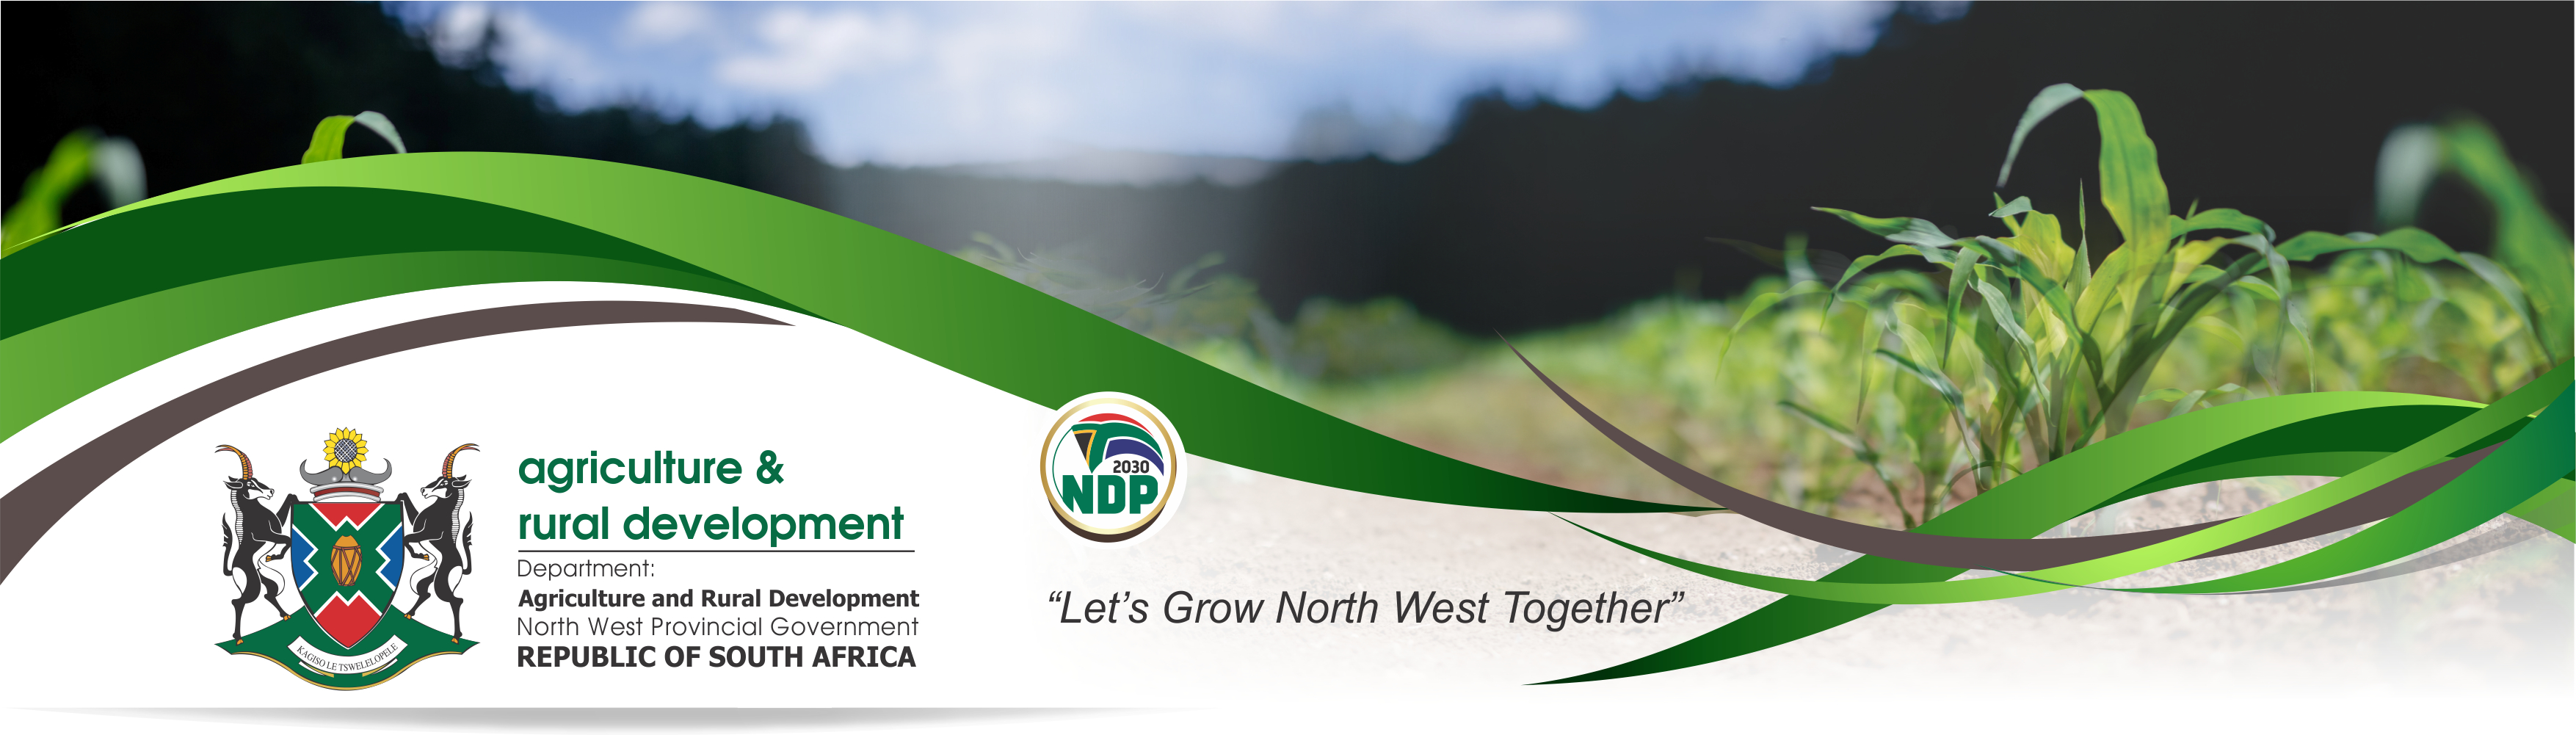 North West Department of Agriculture and Rural Development